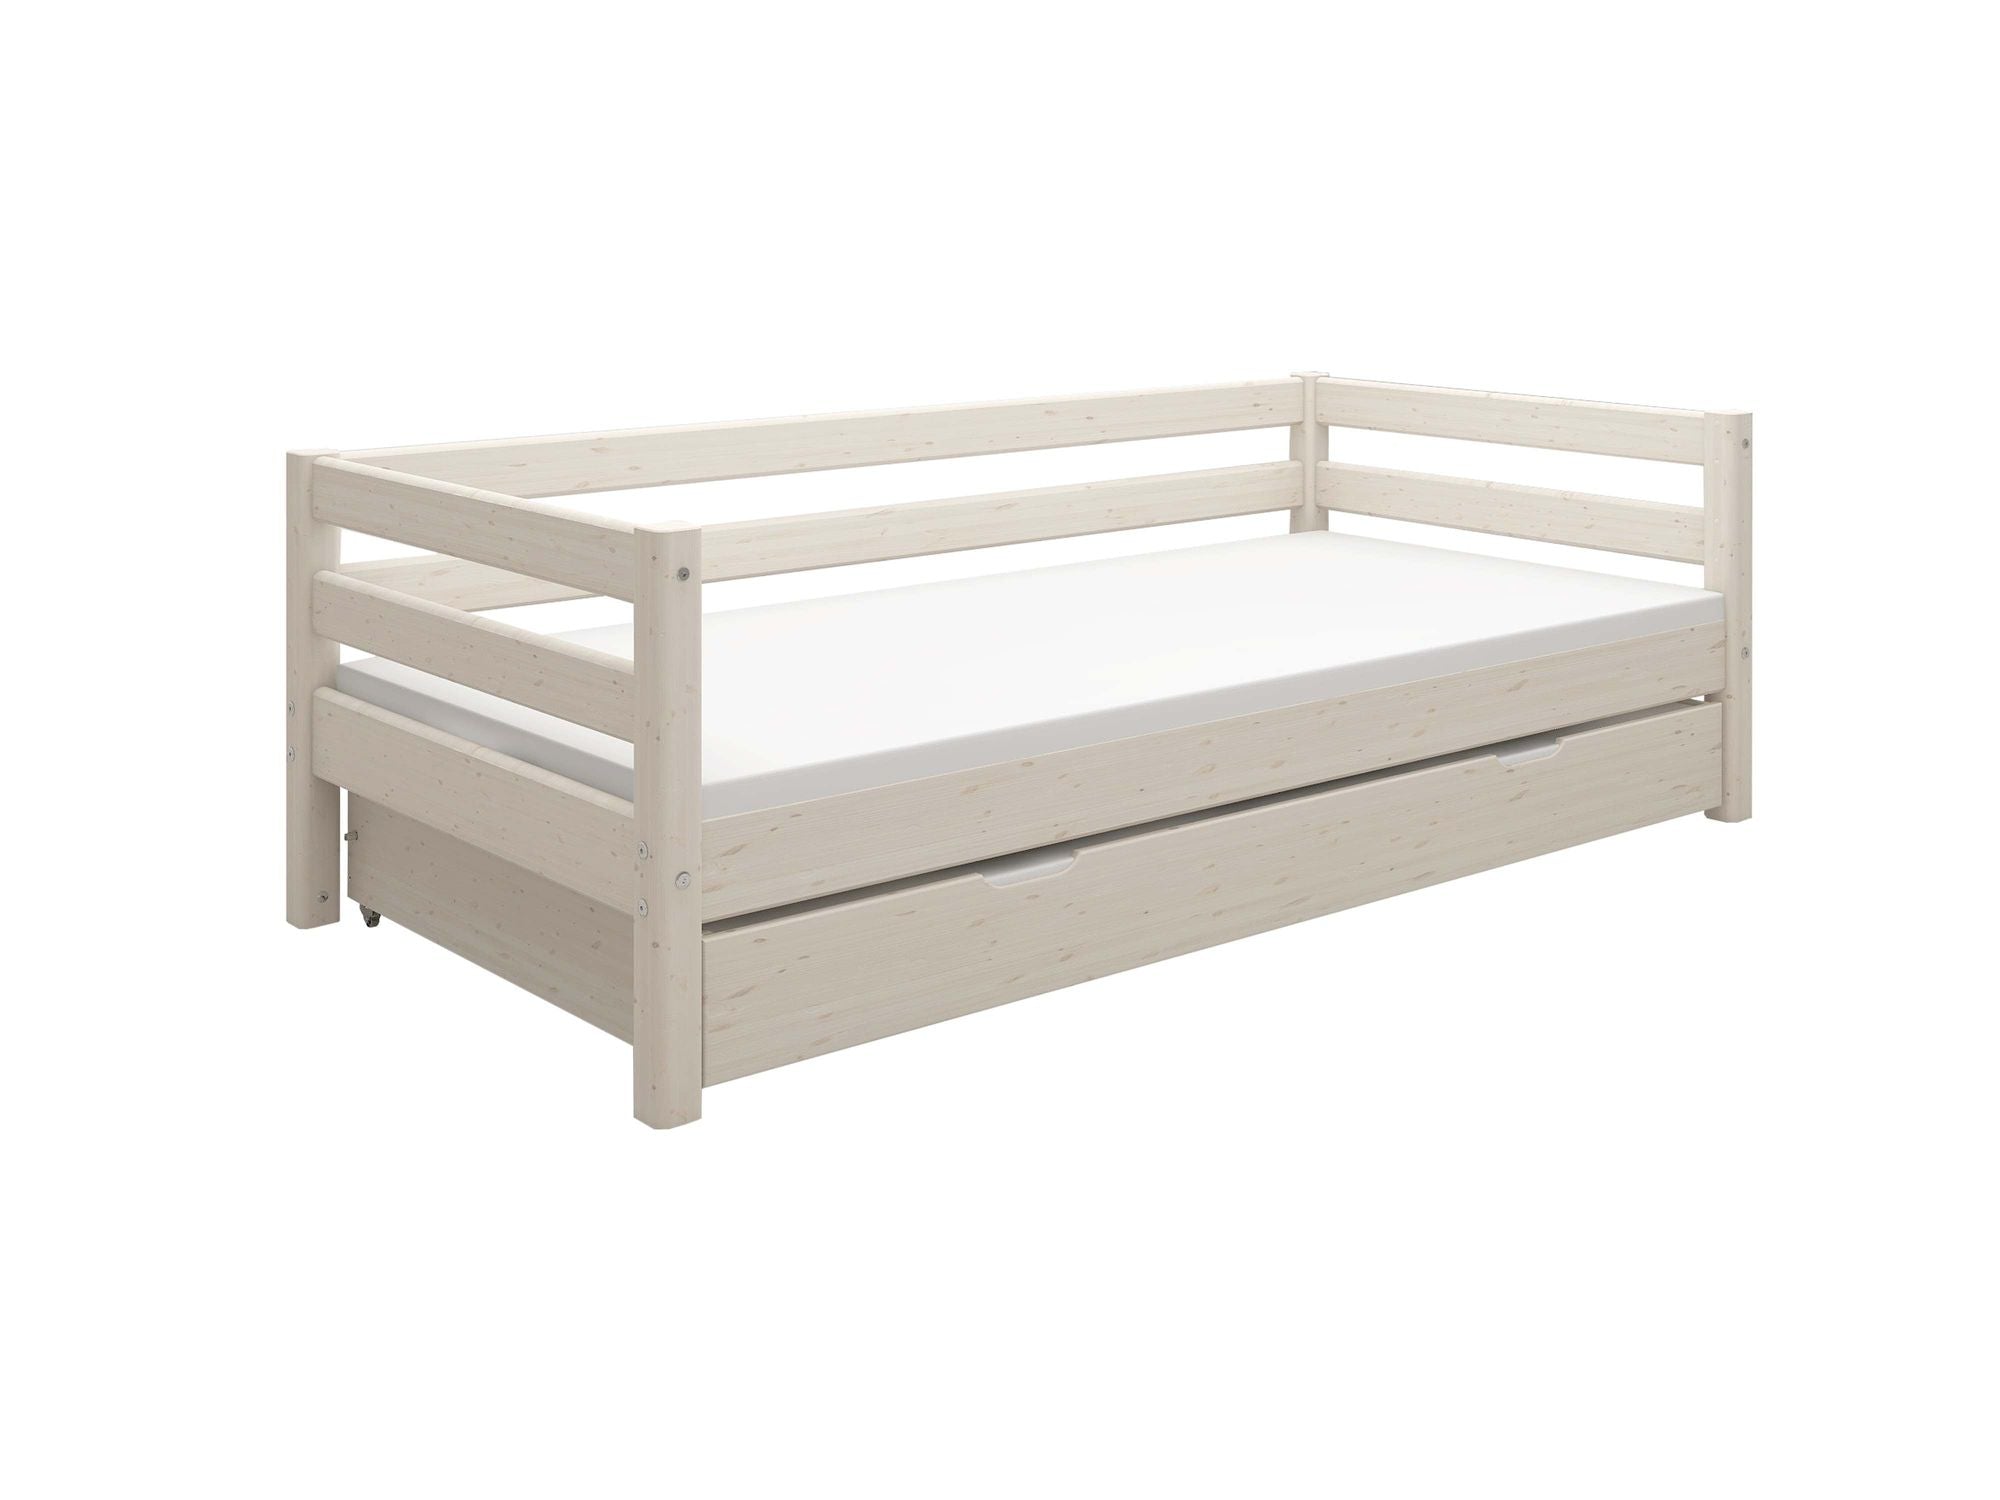 FLEXA Single bed with pull-out bed